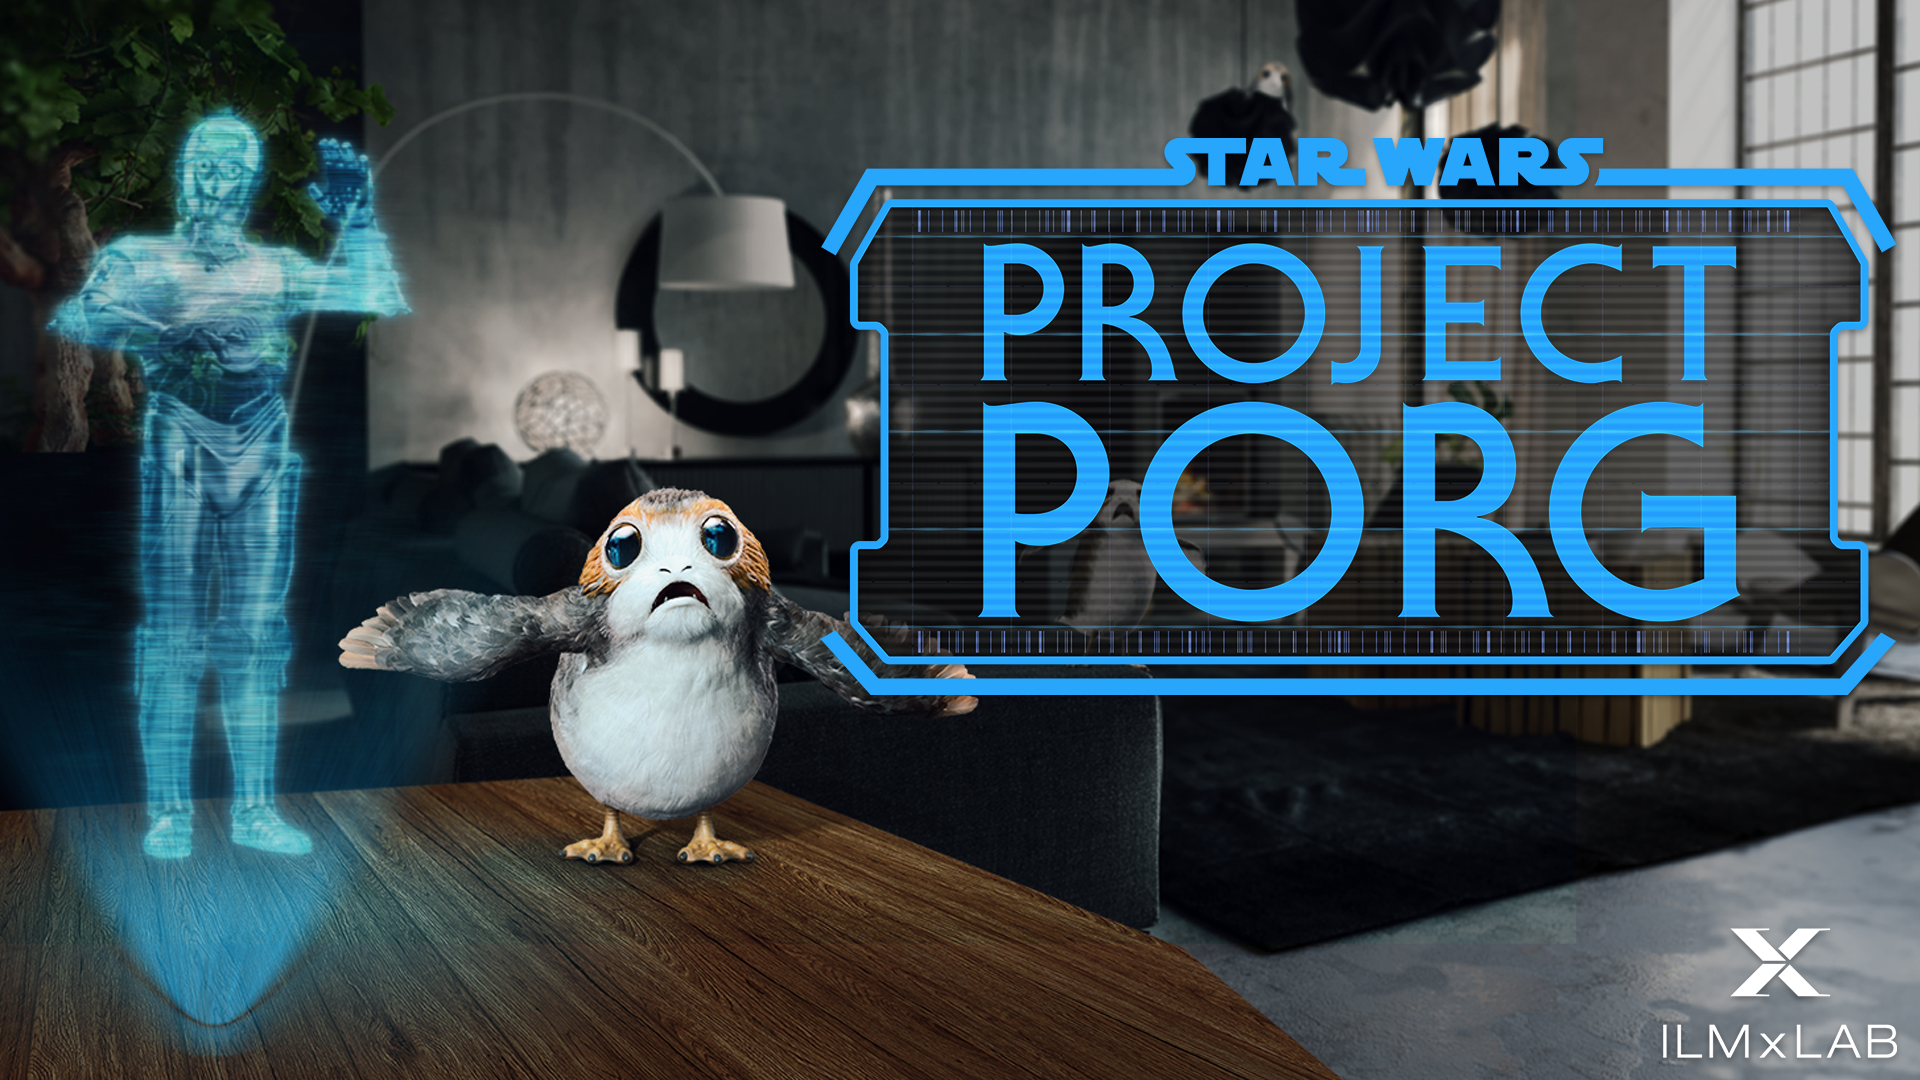 Project Porg Has Arrived!